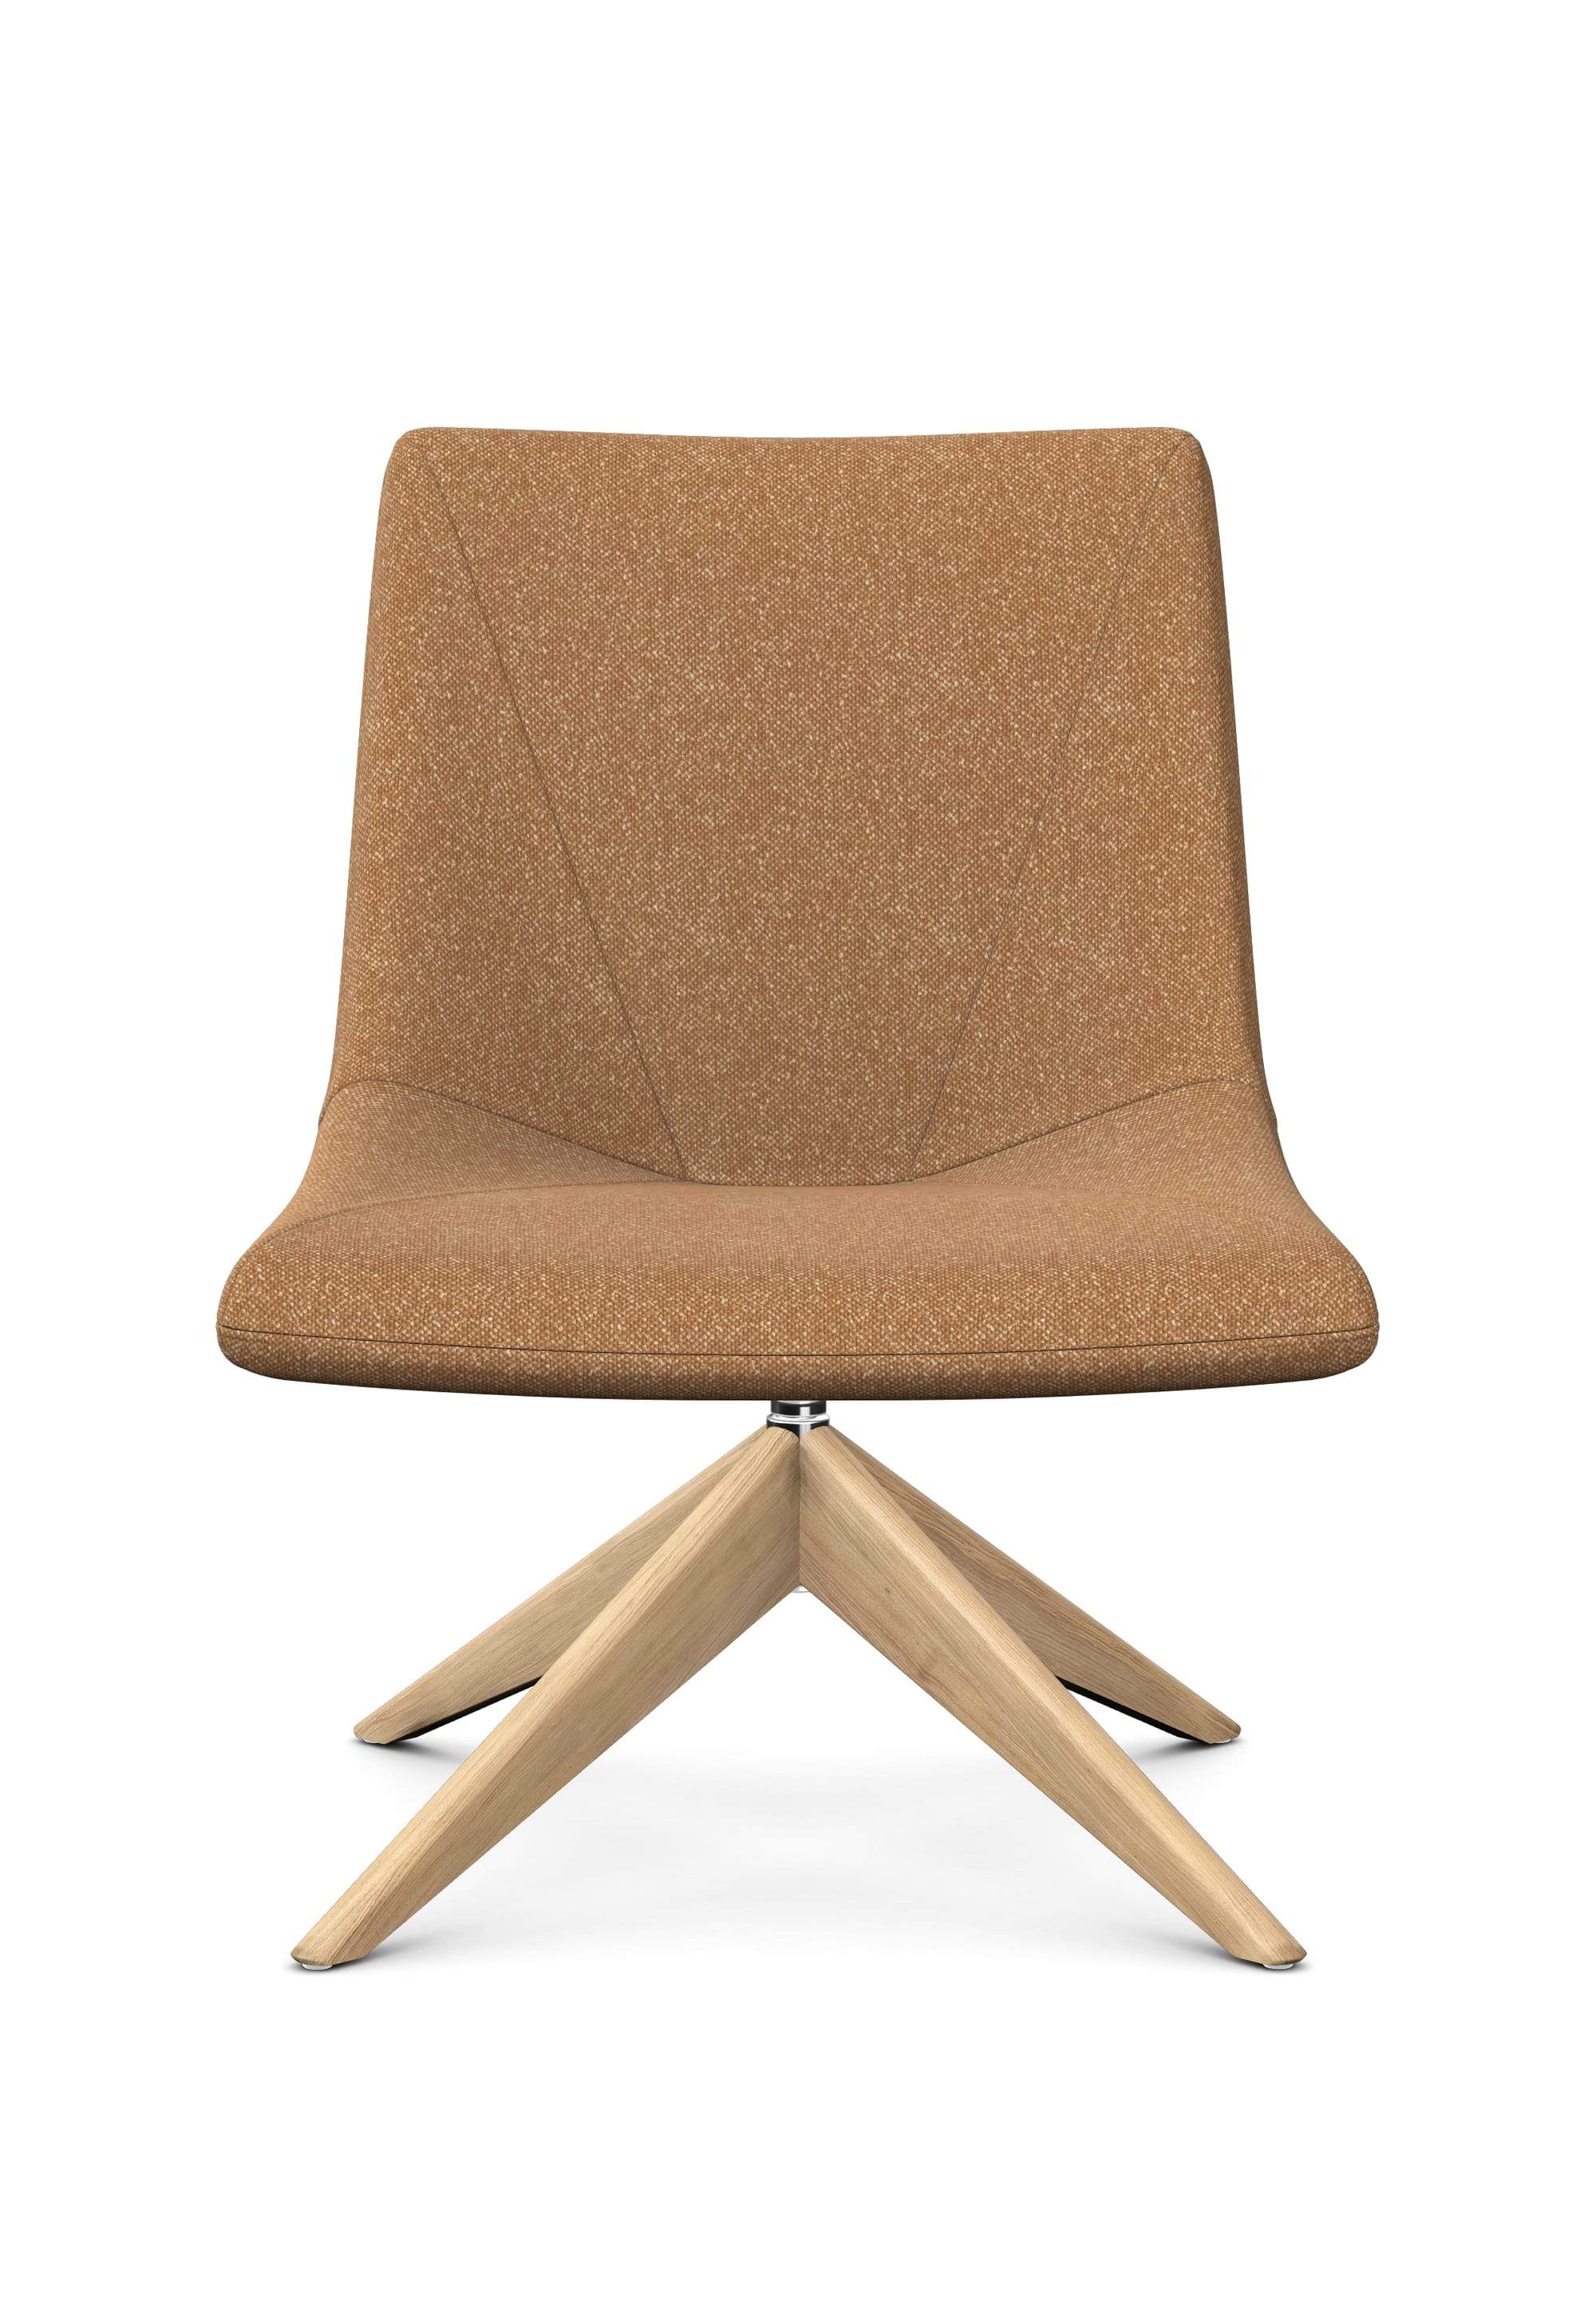 REMI - Extra Large Chair, Pyramidal Wooden Base